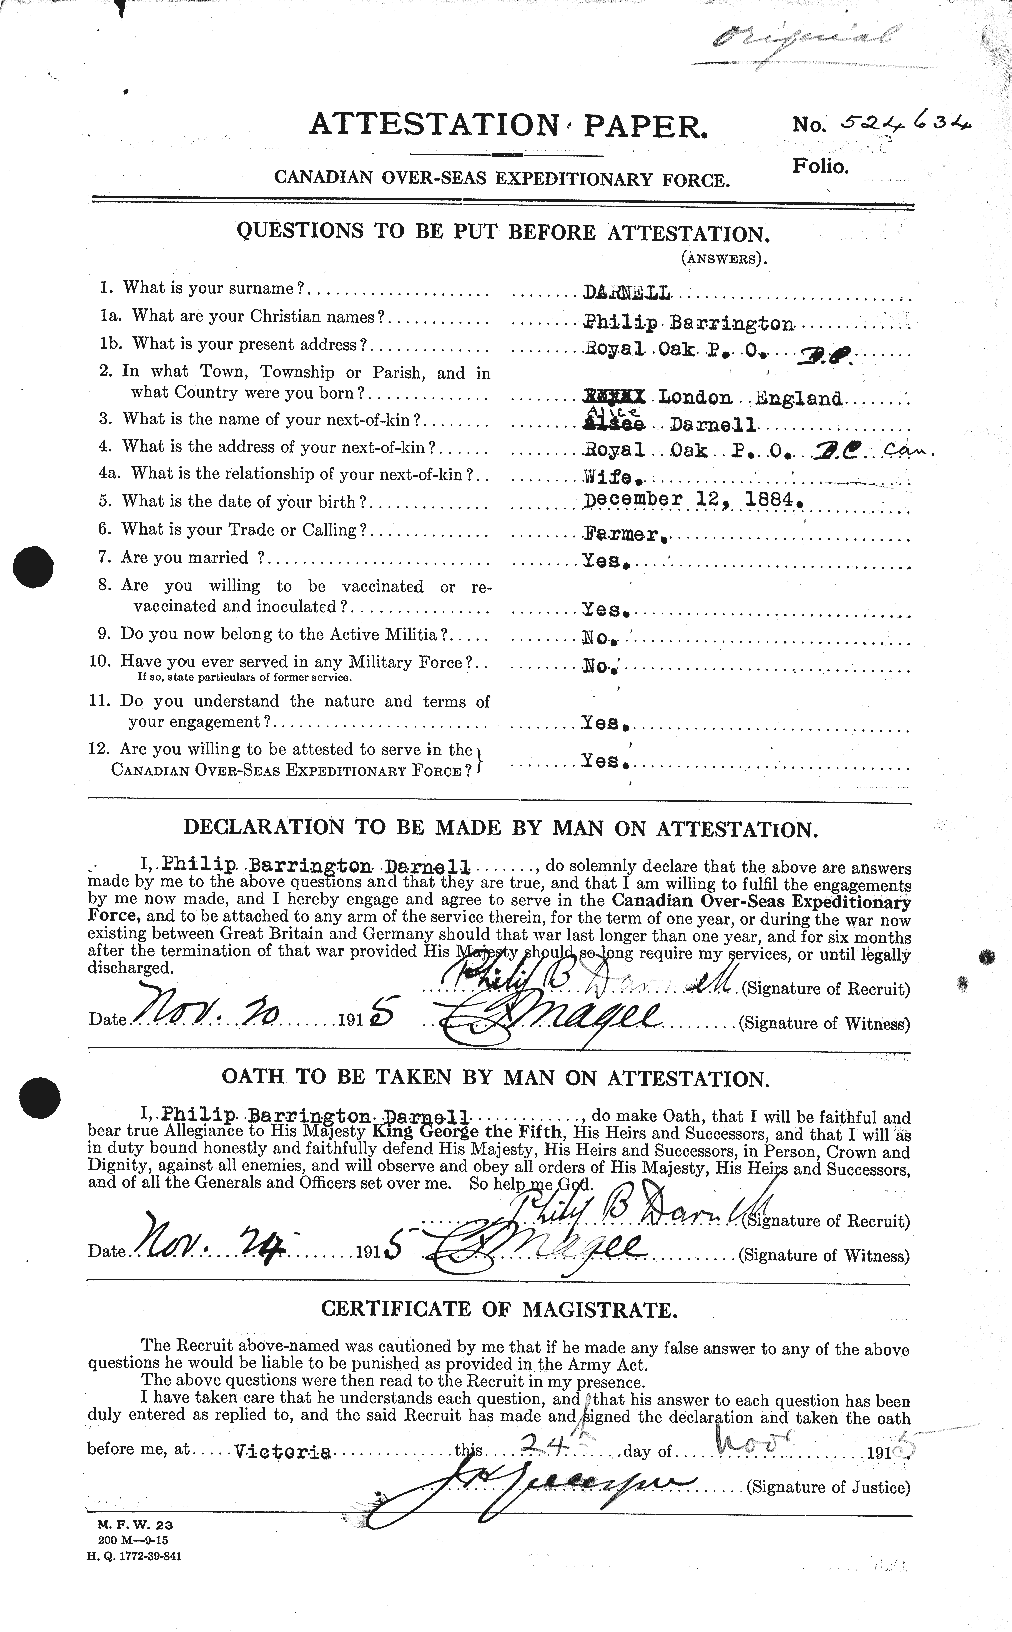 Personnel Records of the First World War - CEF 280296a